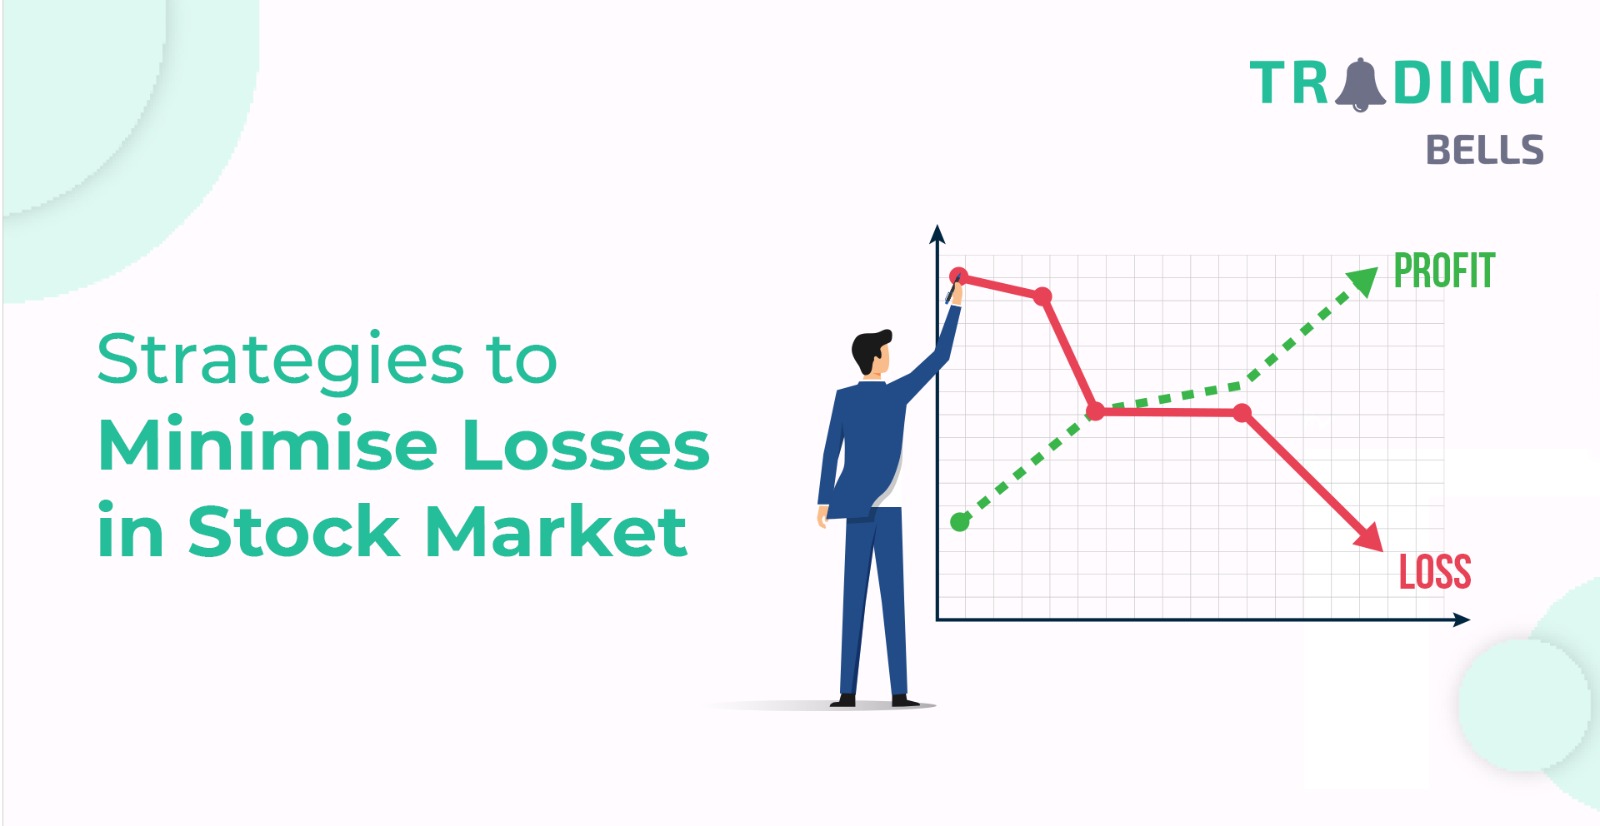 Strategies to Minimise Losses in Stock Market